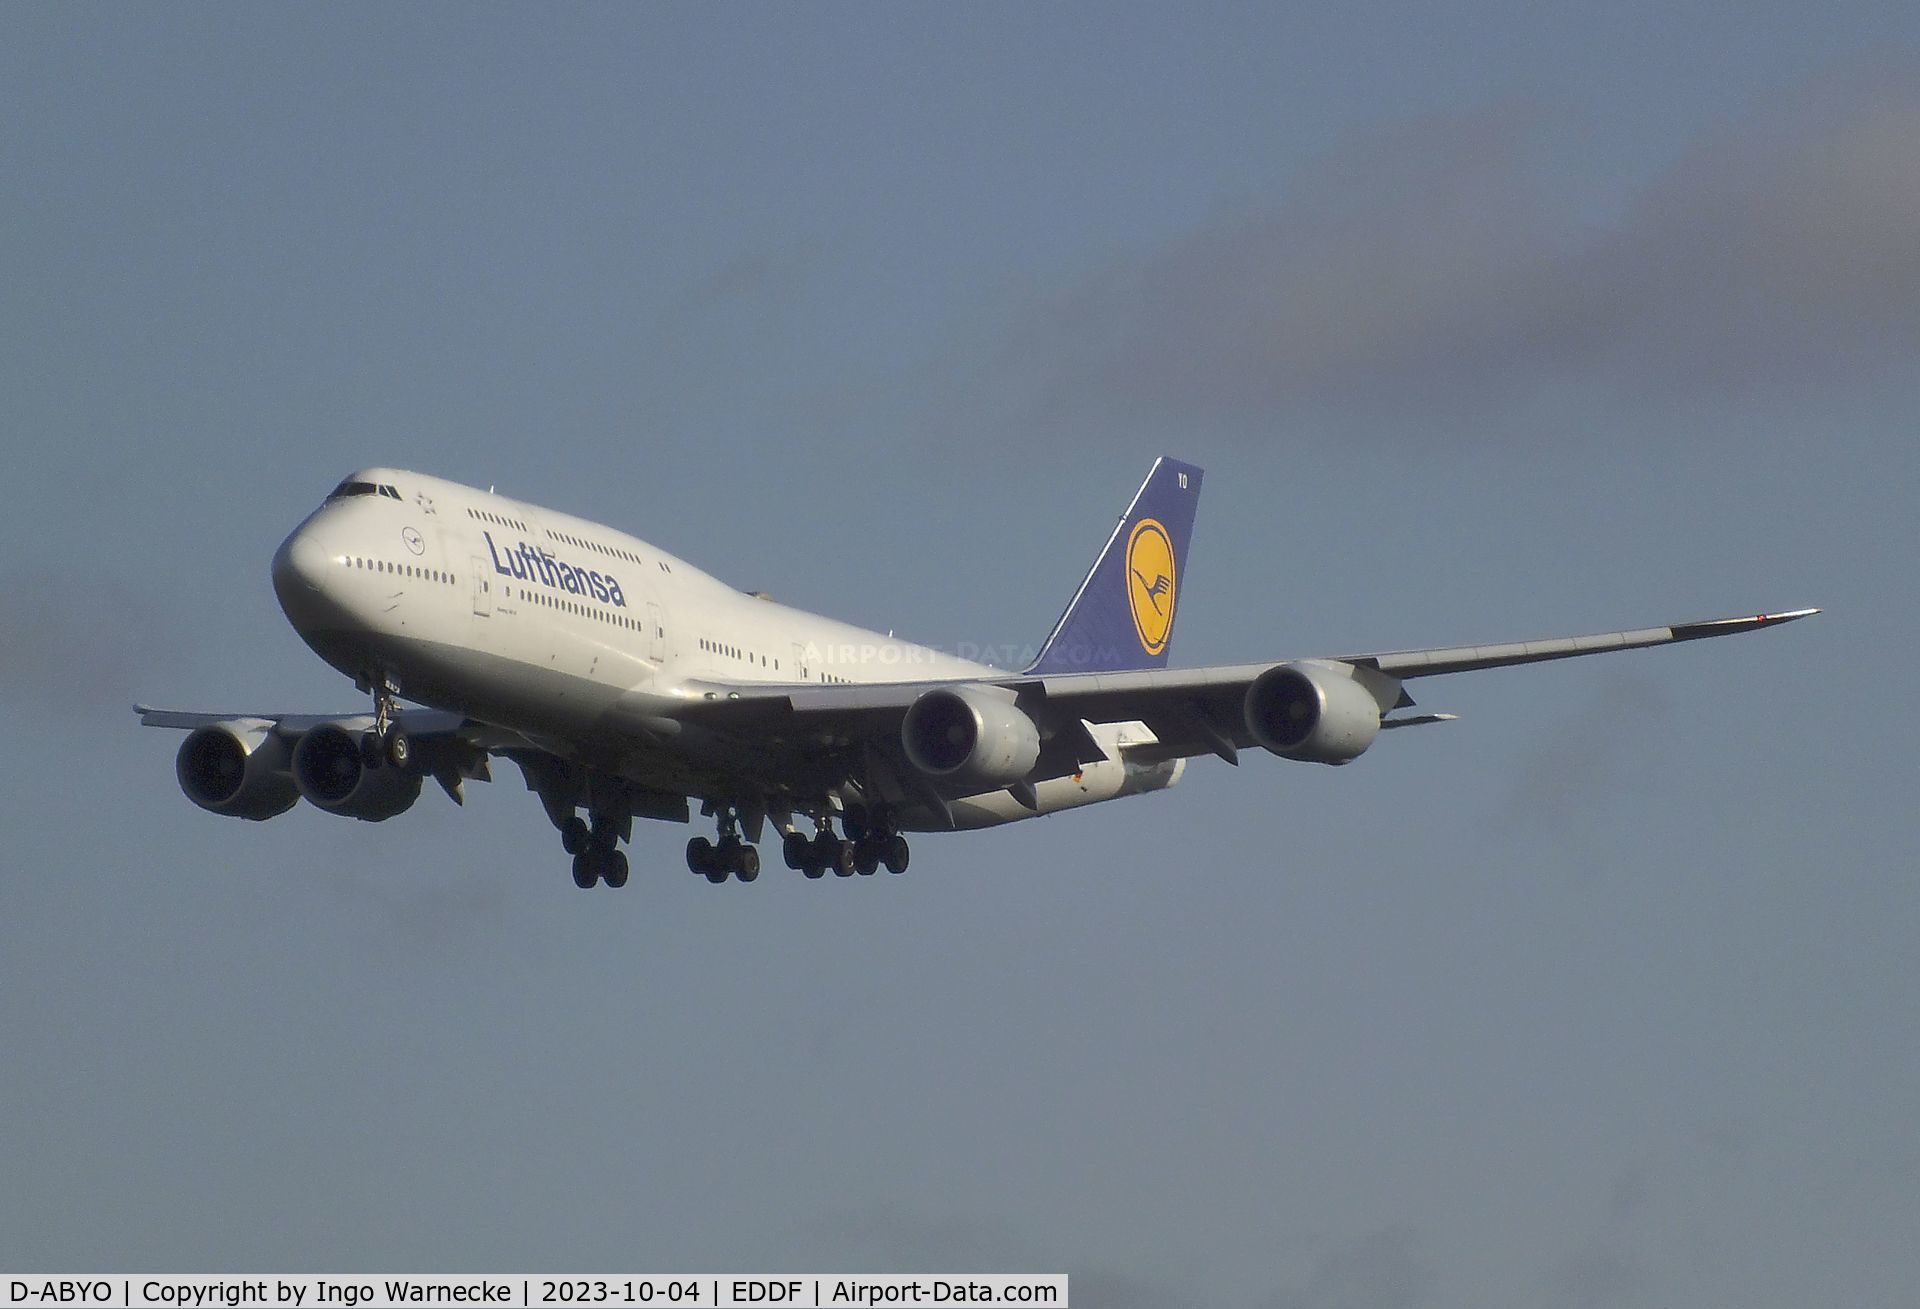 D-ABYO, 2014 Boeing 747-830 C/N 37841, Boeing 747-830 of Lufthansa on final approach to Frankfurt-Main airport